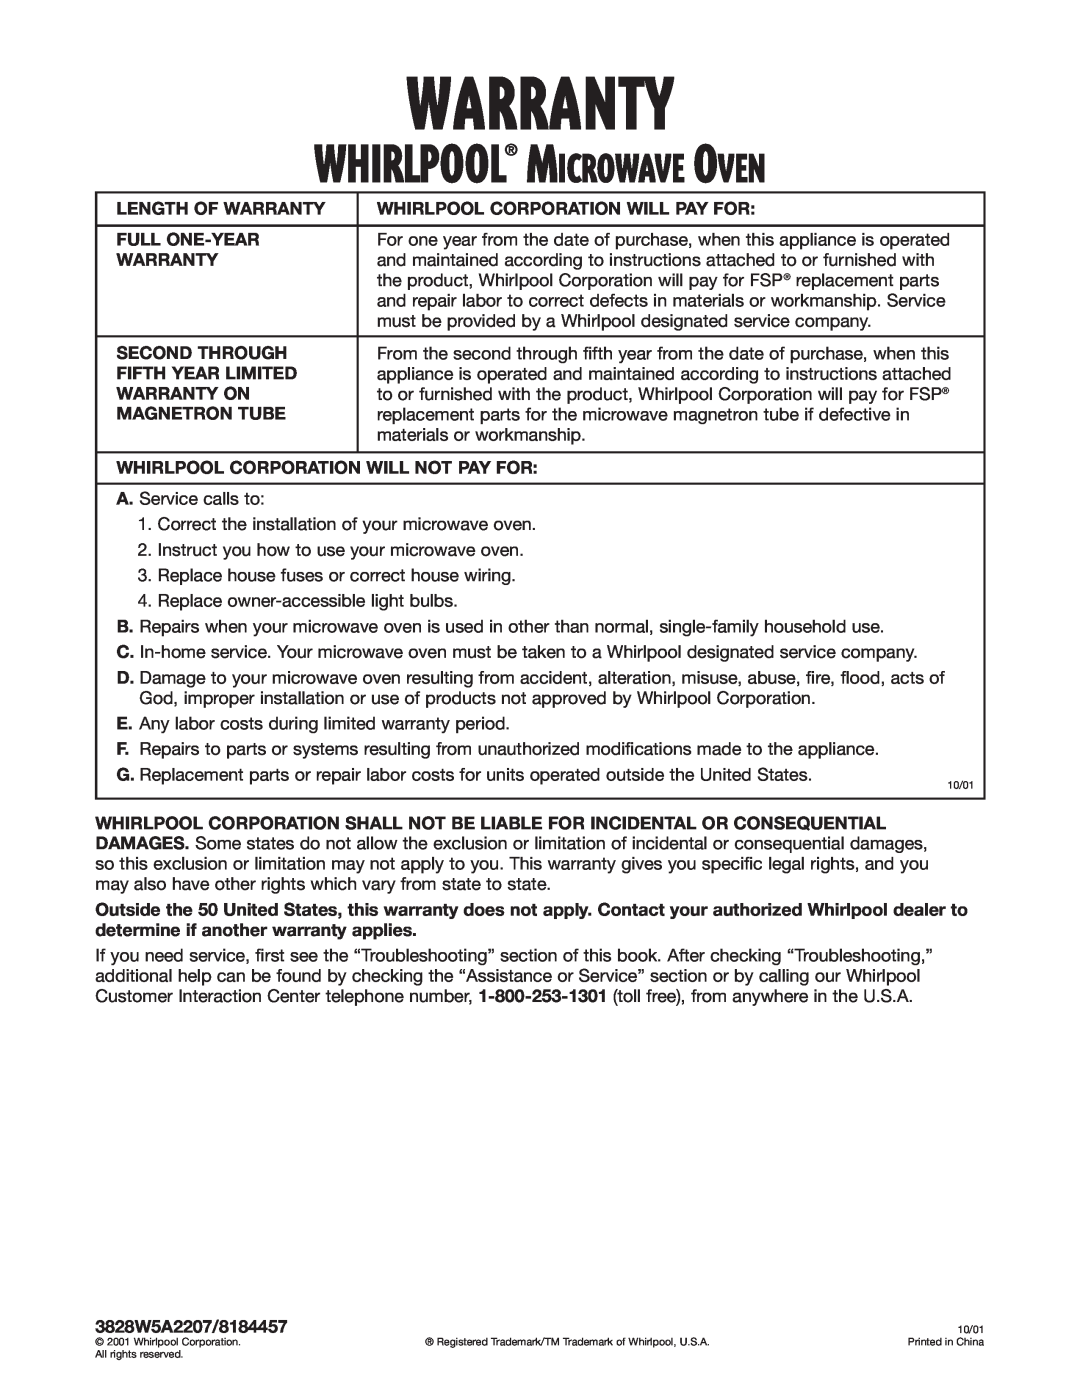 Whirlpool MT1111SK installation instructions Warranty, Whirlpool Microwave Oven 